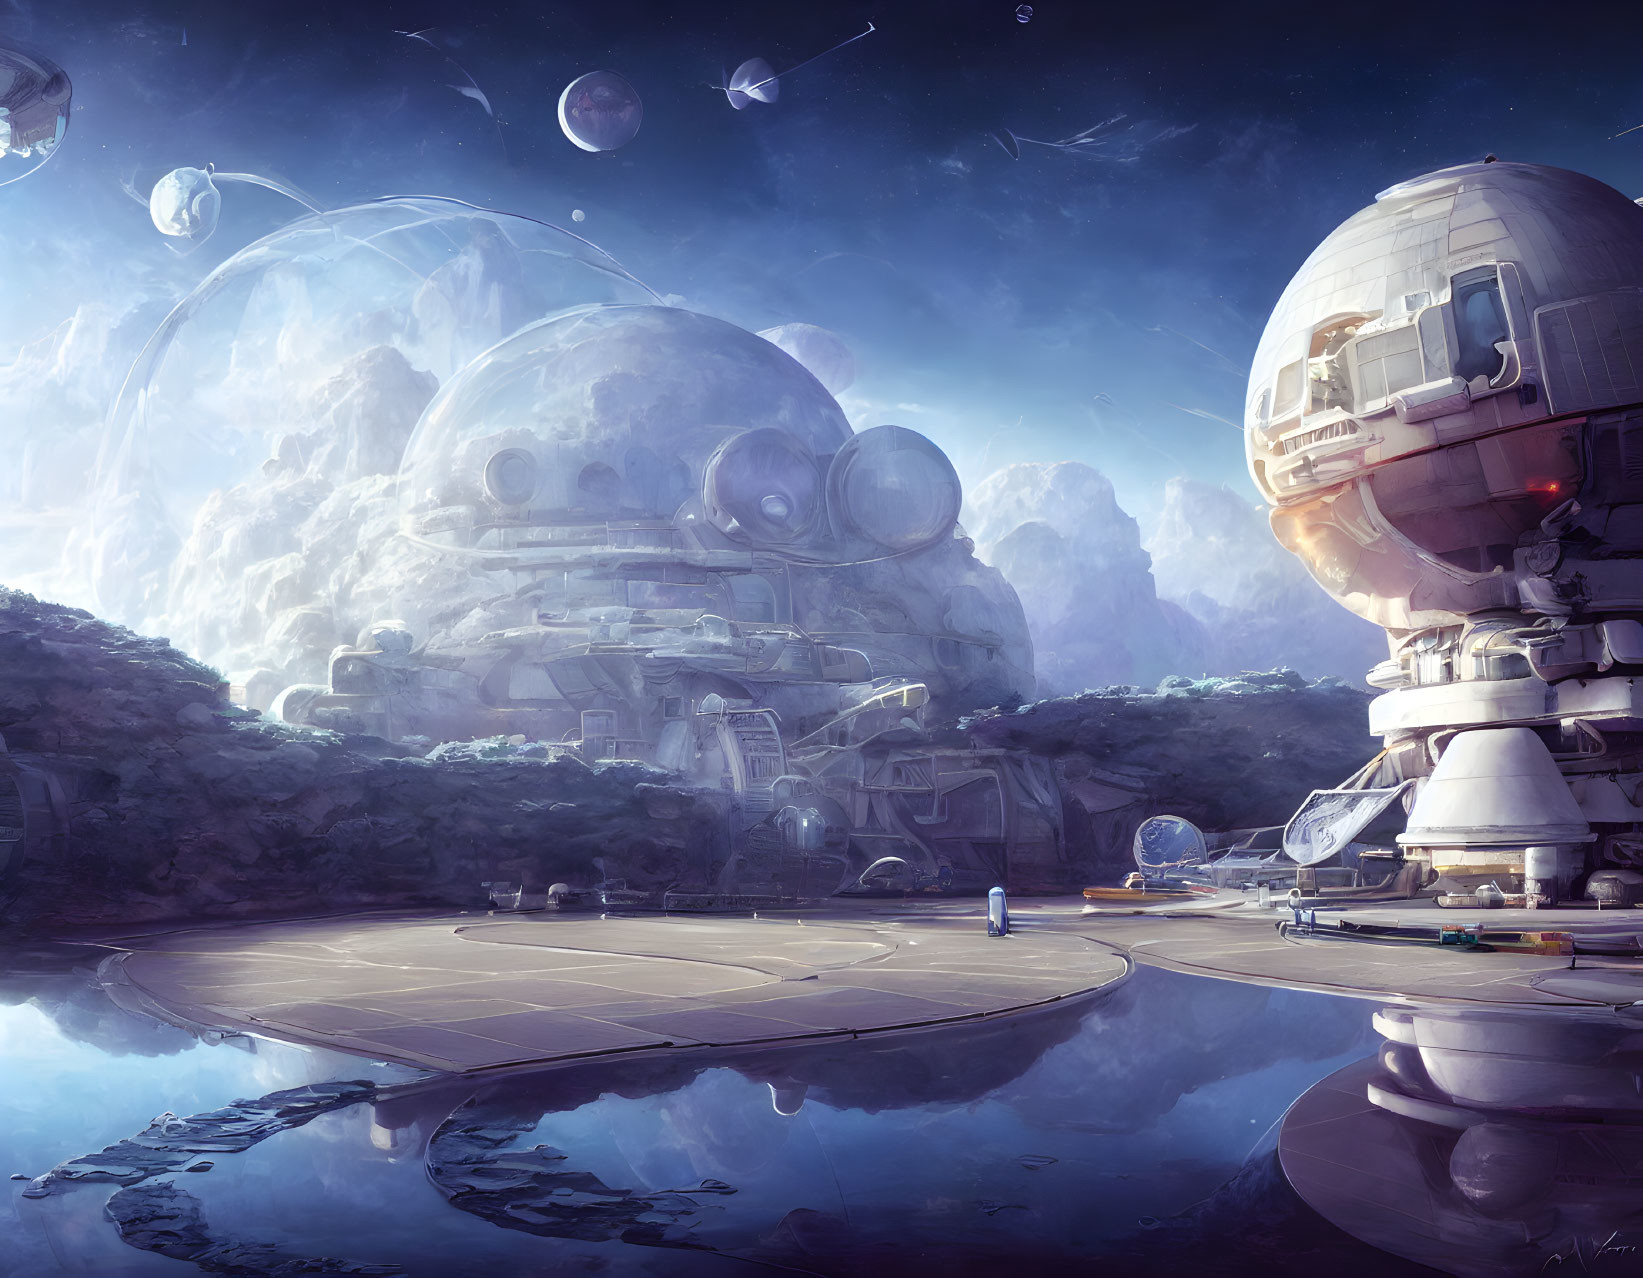 Futuristic colony with dome-like structures on rocky terrain under starry sky